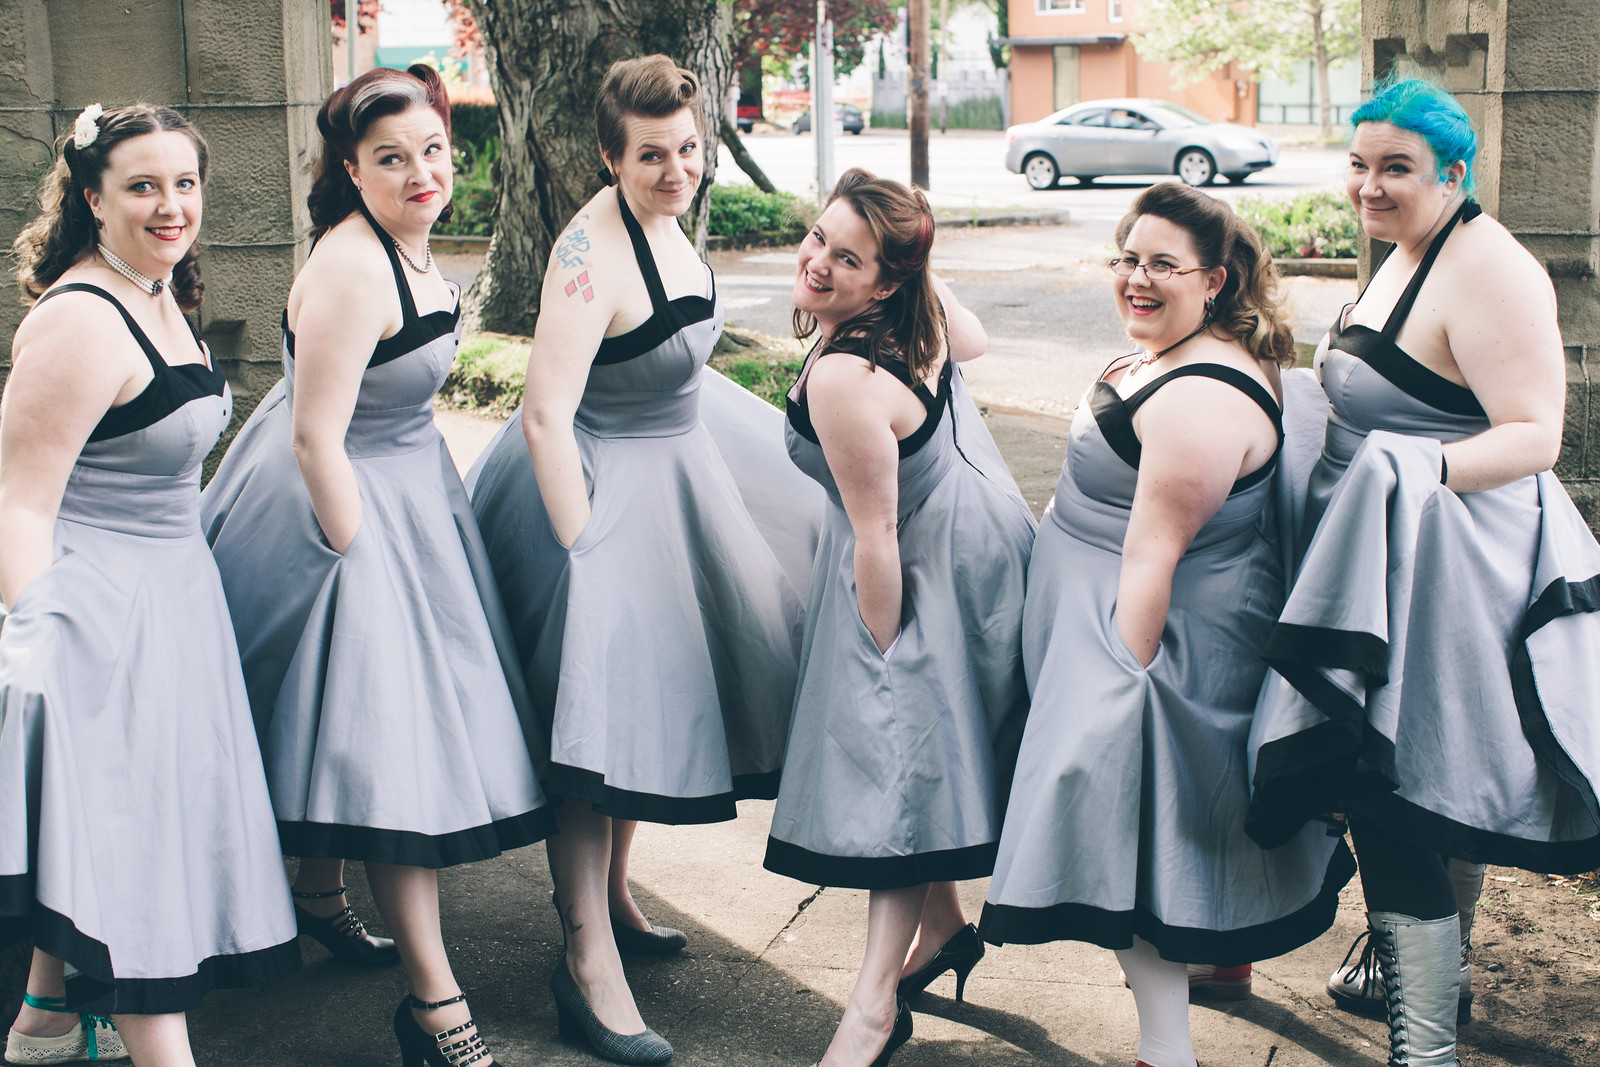  Kathryn and her bridal party  Photographer:   Myles Katherine Photography   